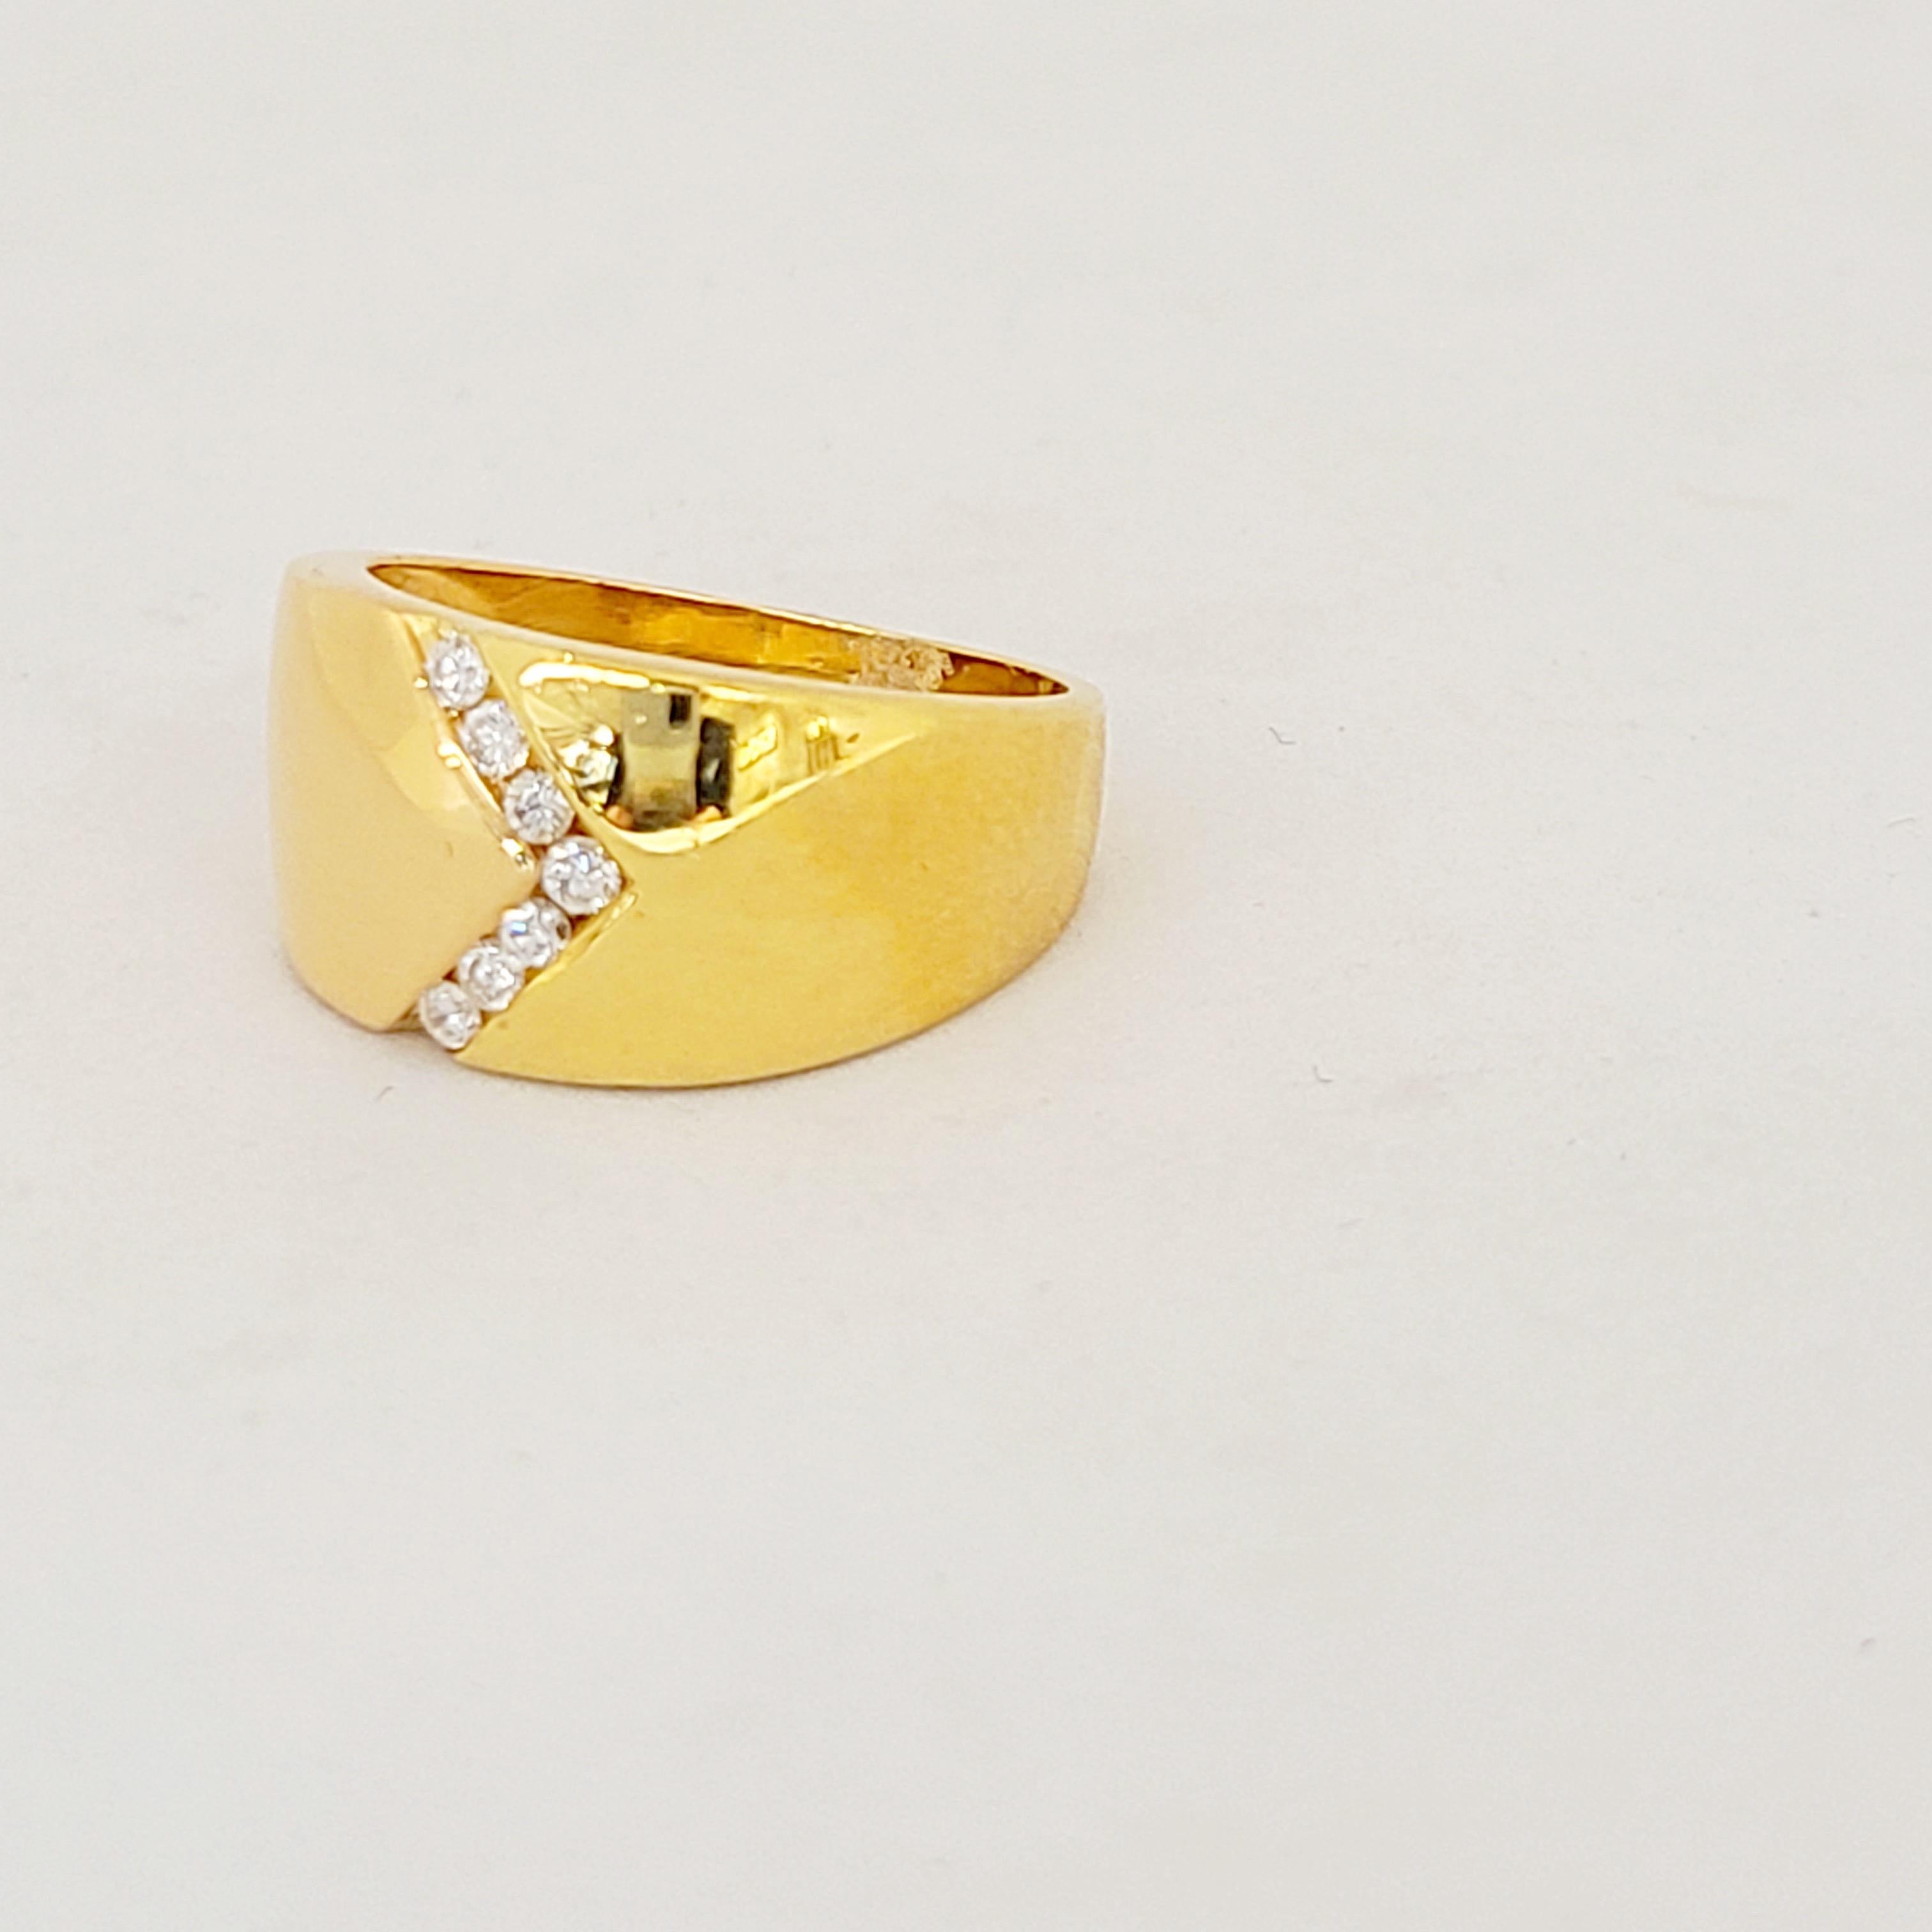 Pretty and shiny 18kt yellow gold ring set with 7 round brilliant diamonds in a V motif.
Diamond weight 0.21 carats
Stamped 750
Size 7.5 sizing may be available